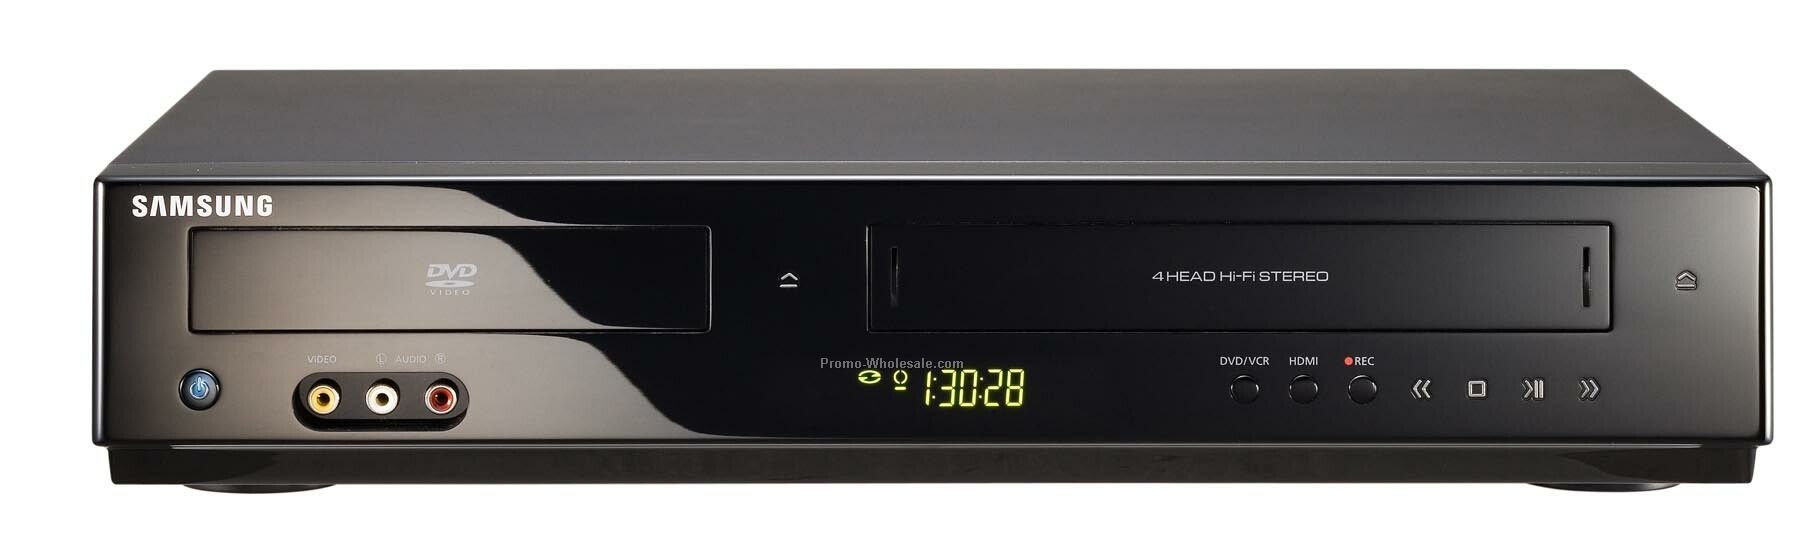 Samsung 1080p Up-conversion DVD/Vcr Combo